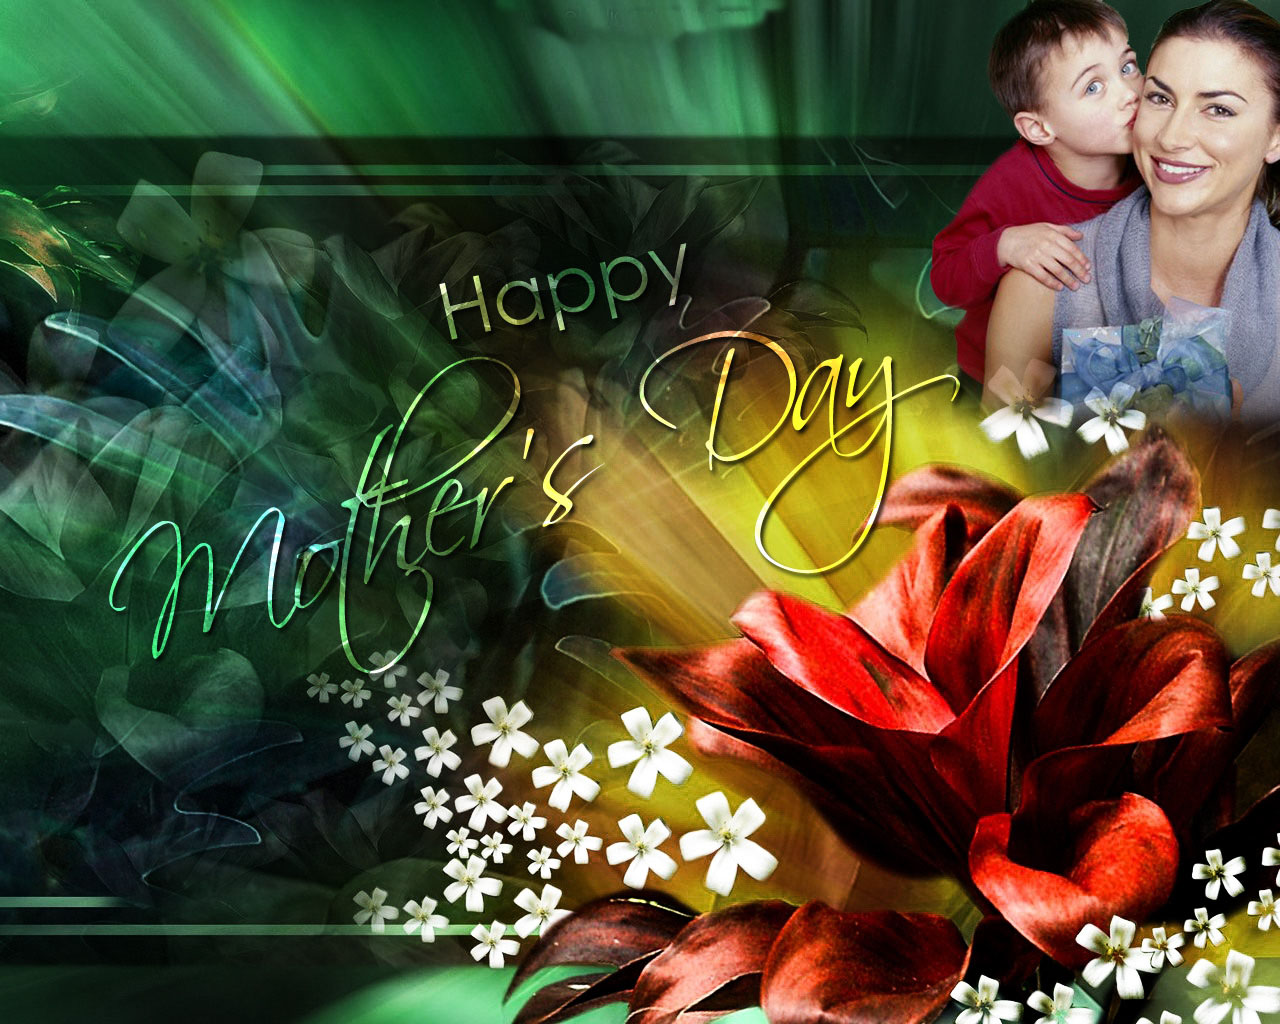 Happy Mothers Day Desktop Backgrounds Cover Photos Free Download